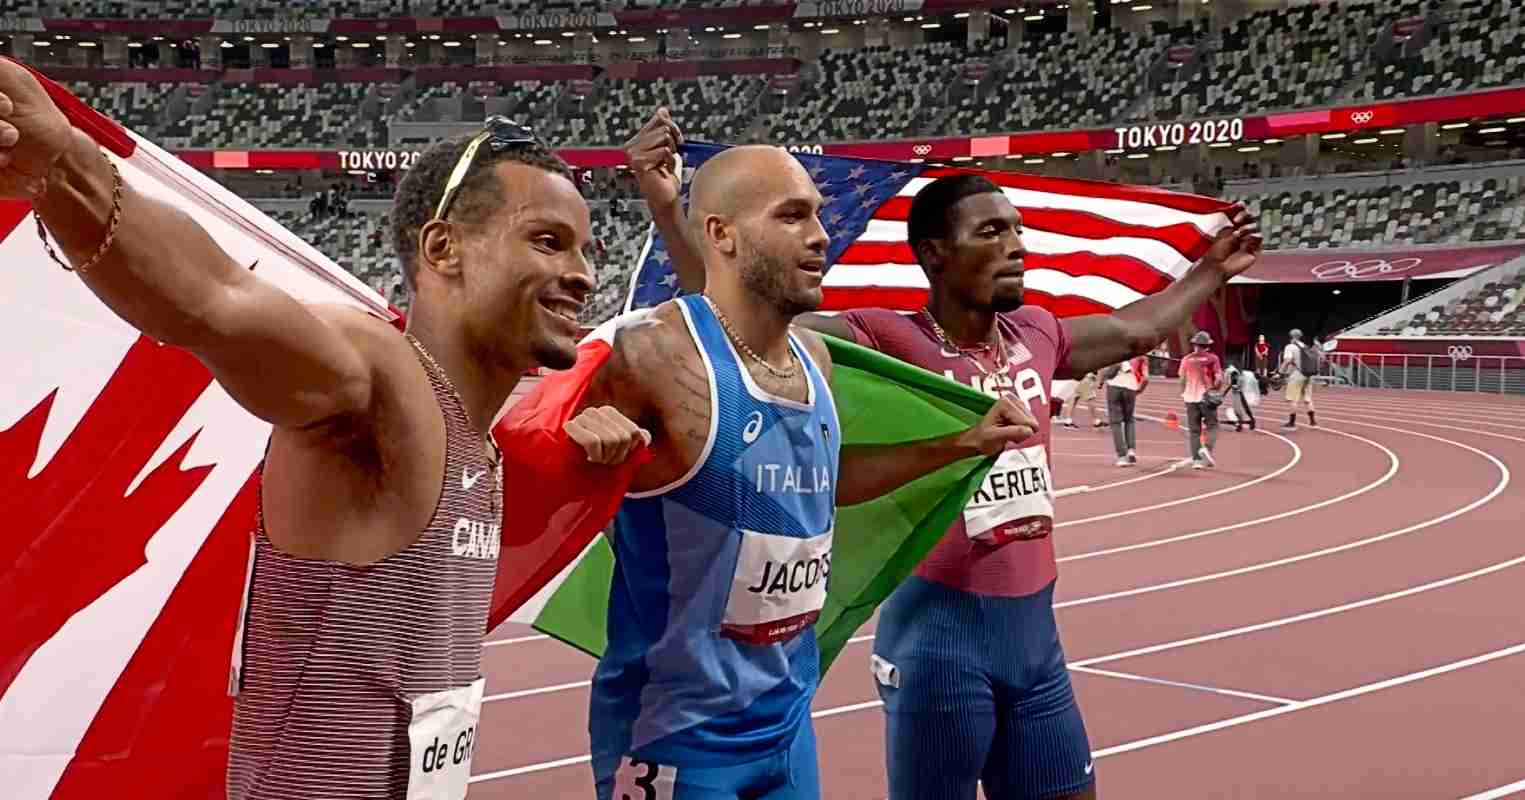 Andre de Grasse (L), Lamont Marcell Jacobs and Fred Kerley